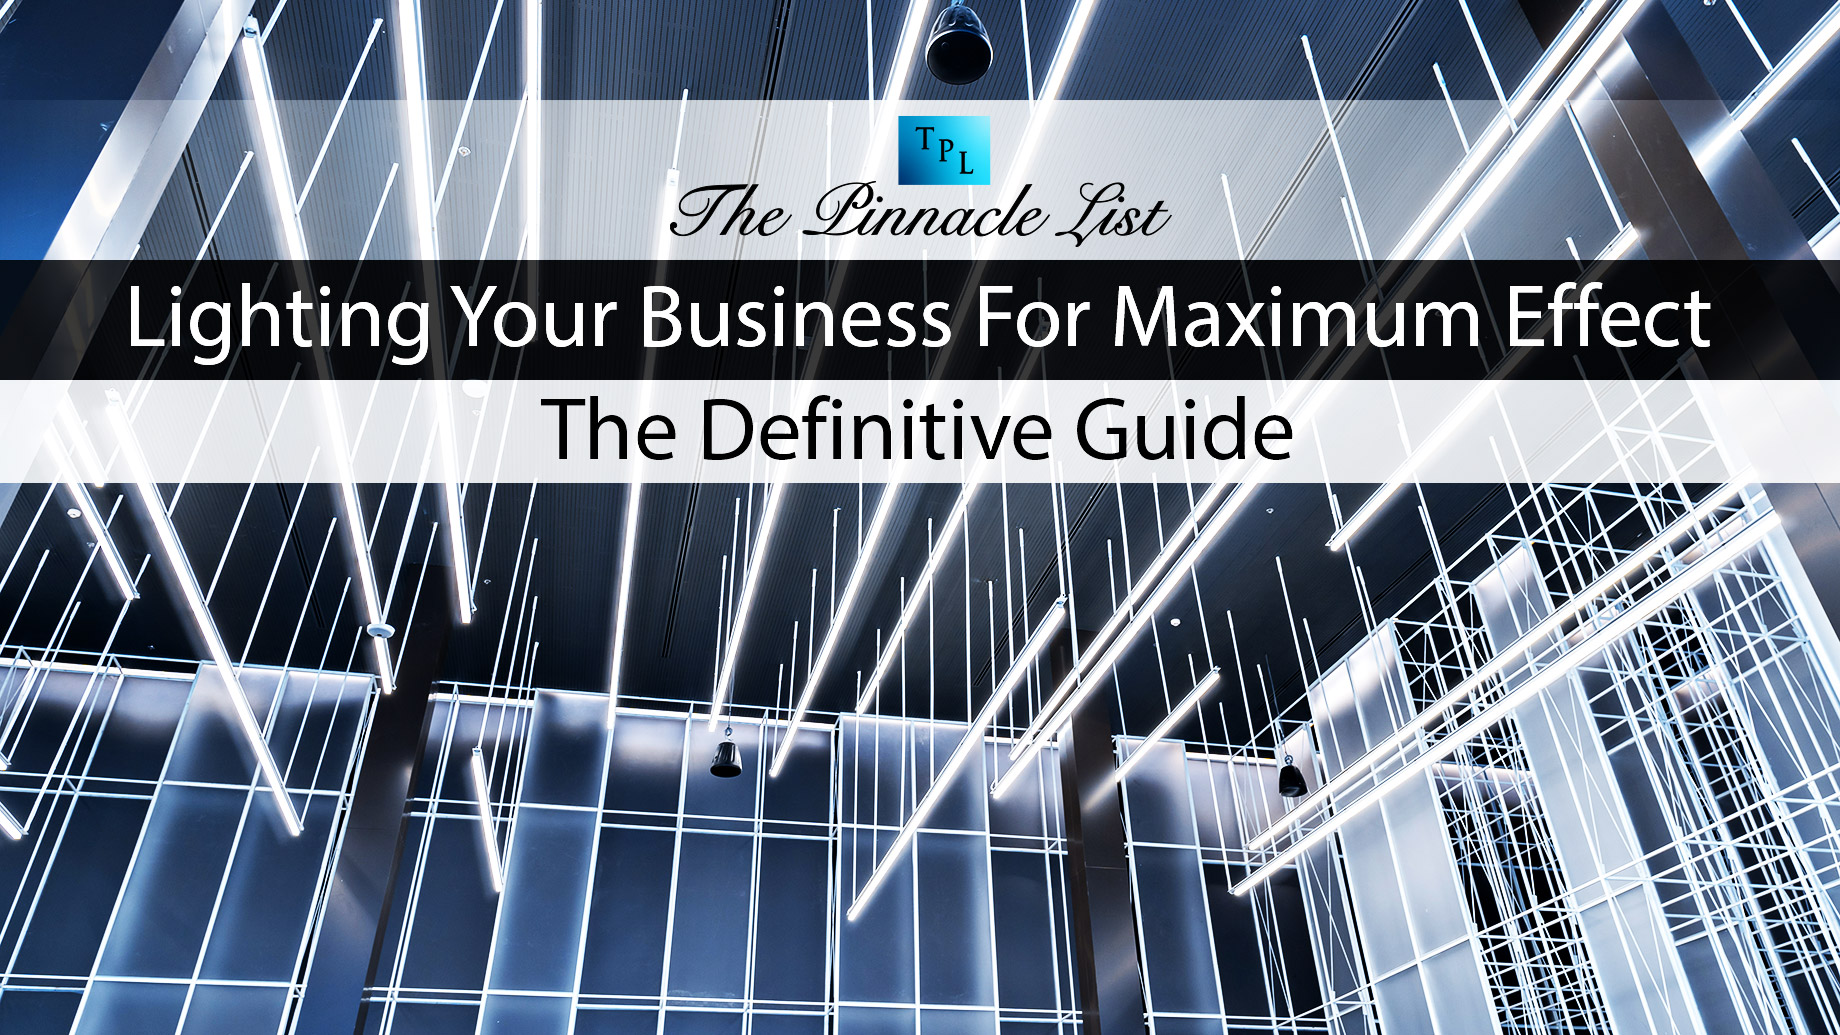 Lighting Your Business For Maximum Effect - The Definitive Guide